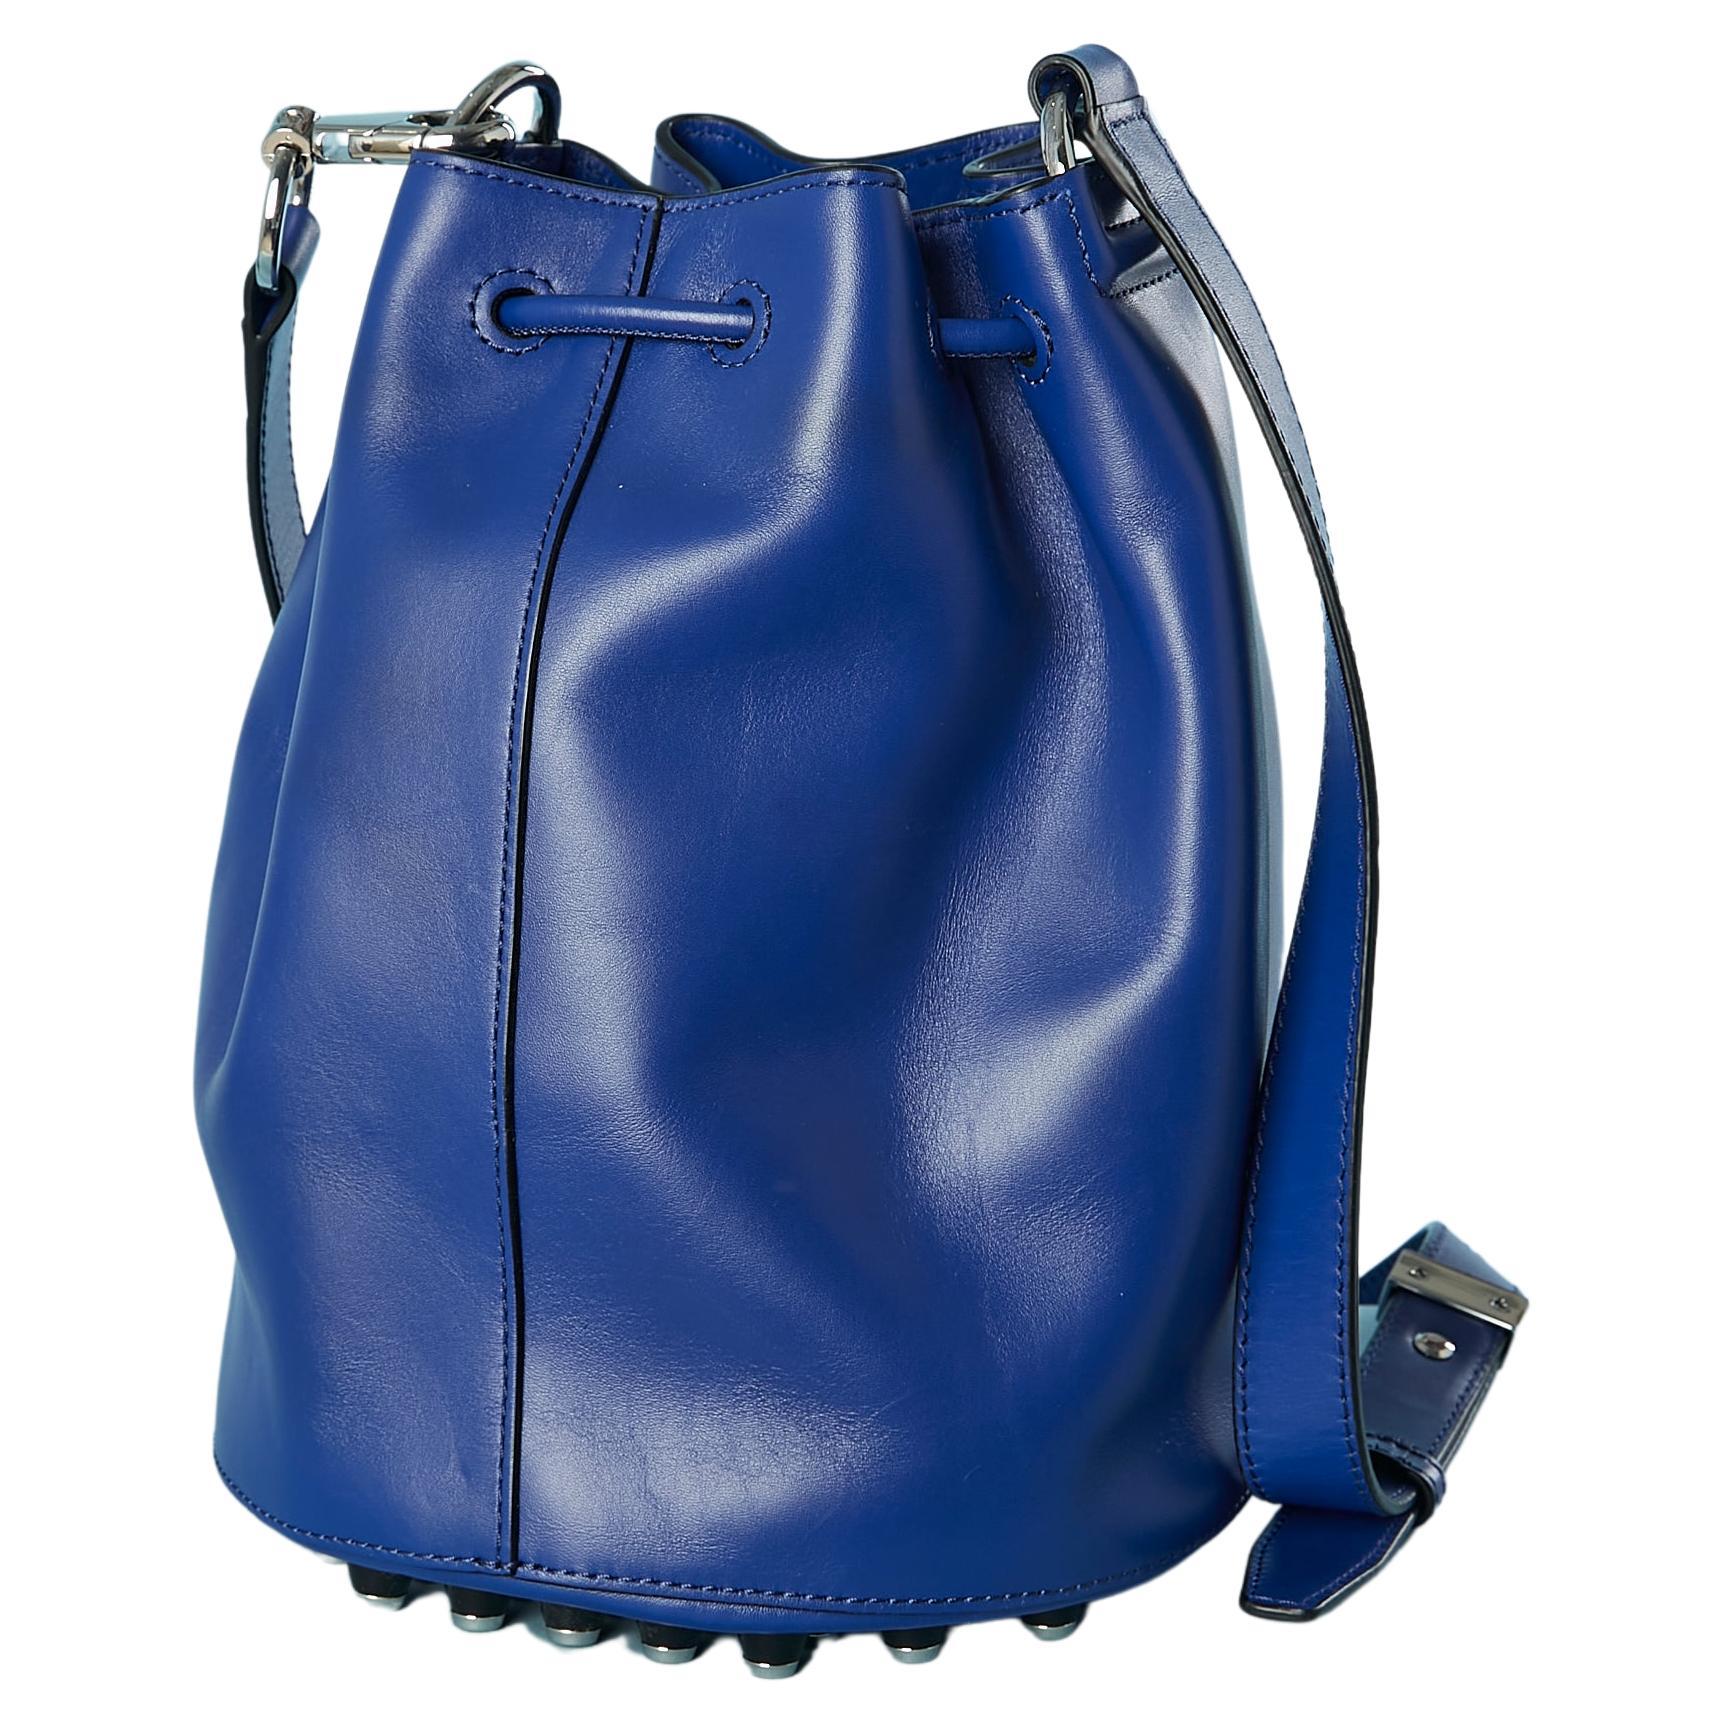 Blue leather bucket bag with silver hardware Alexander Wang NEW with tag For Sale